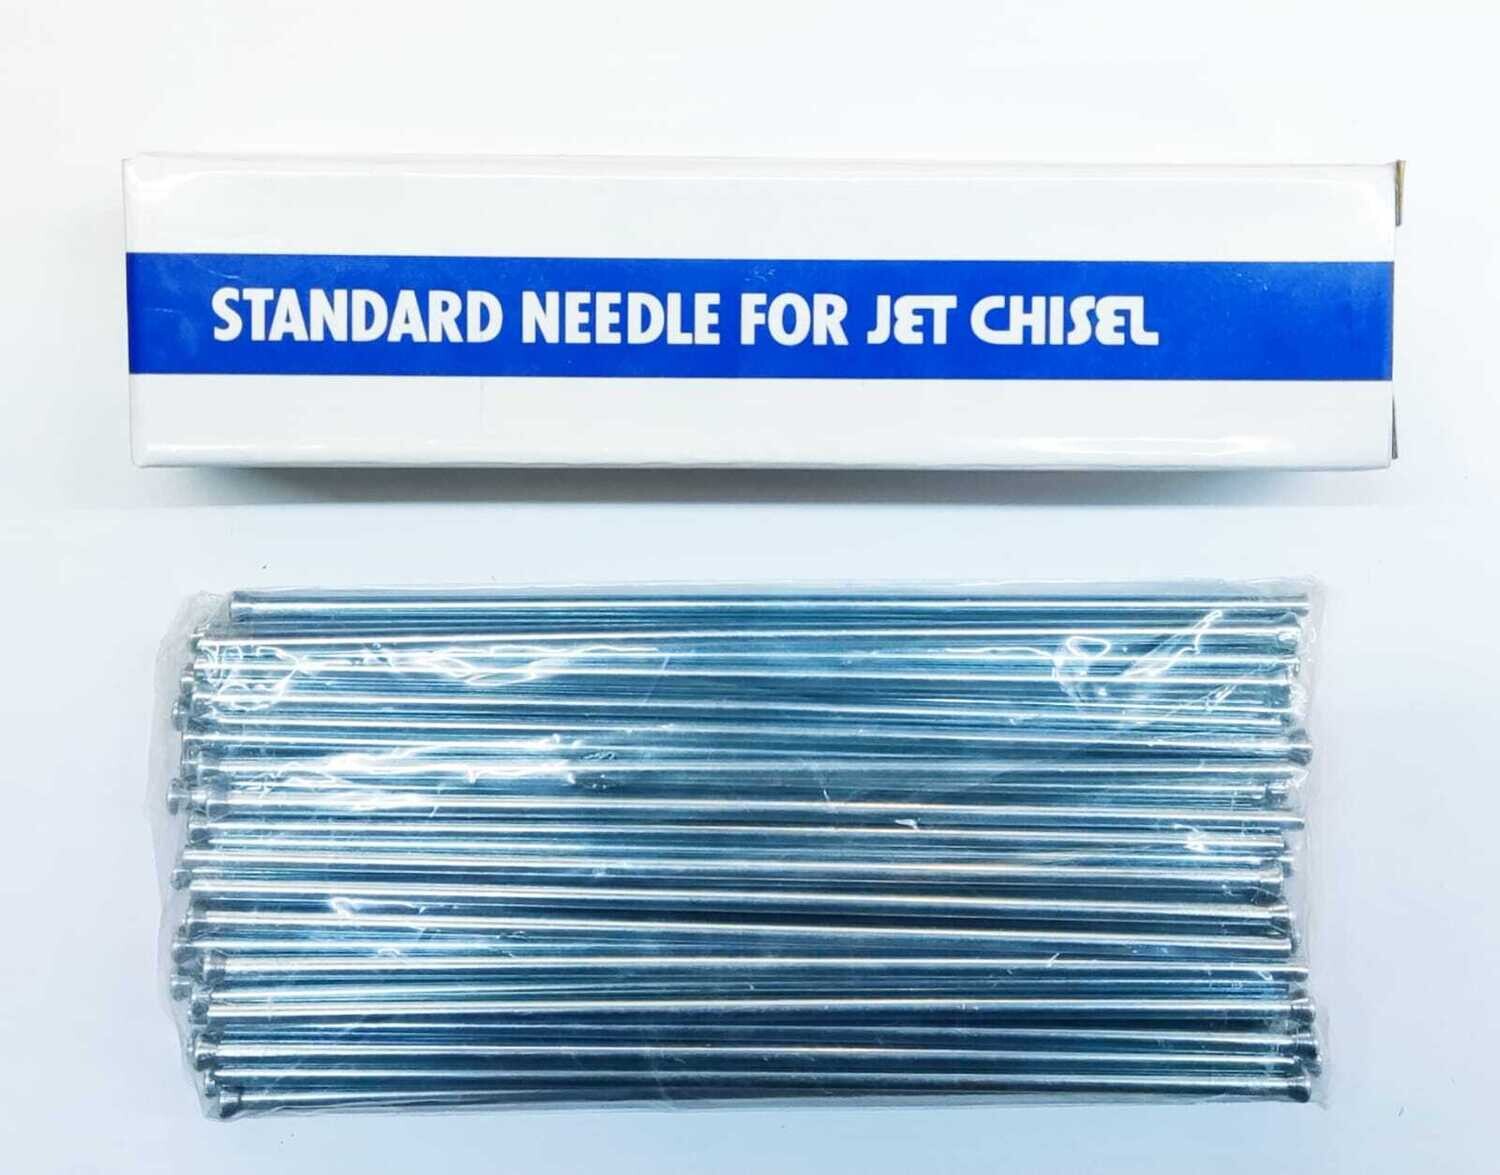 Spare Needles for Jet Chisel - 4 Ø x 180 mm Flat